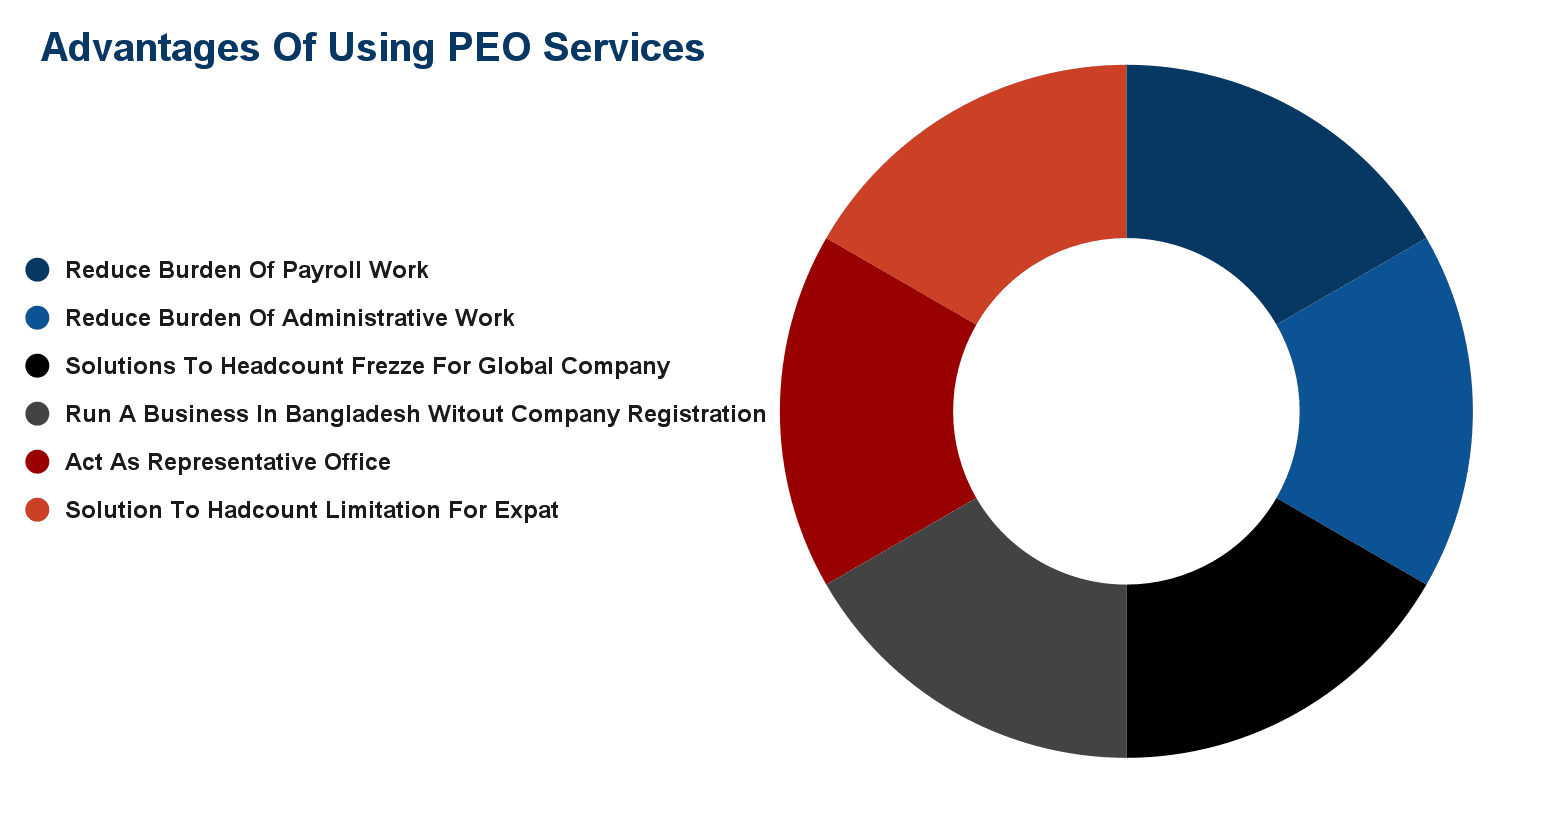 Advantage Of Using PEO Services